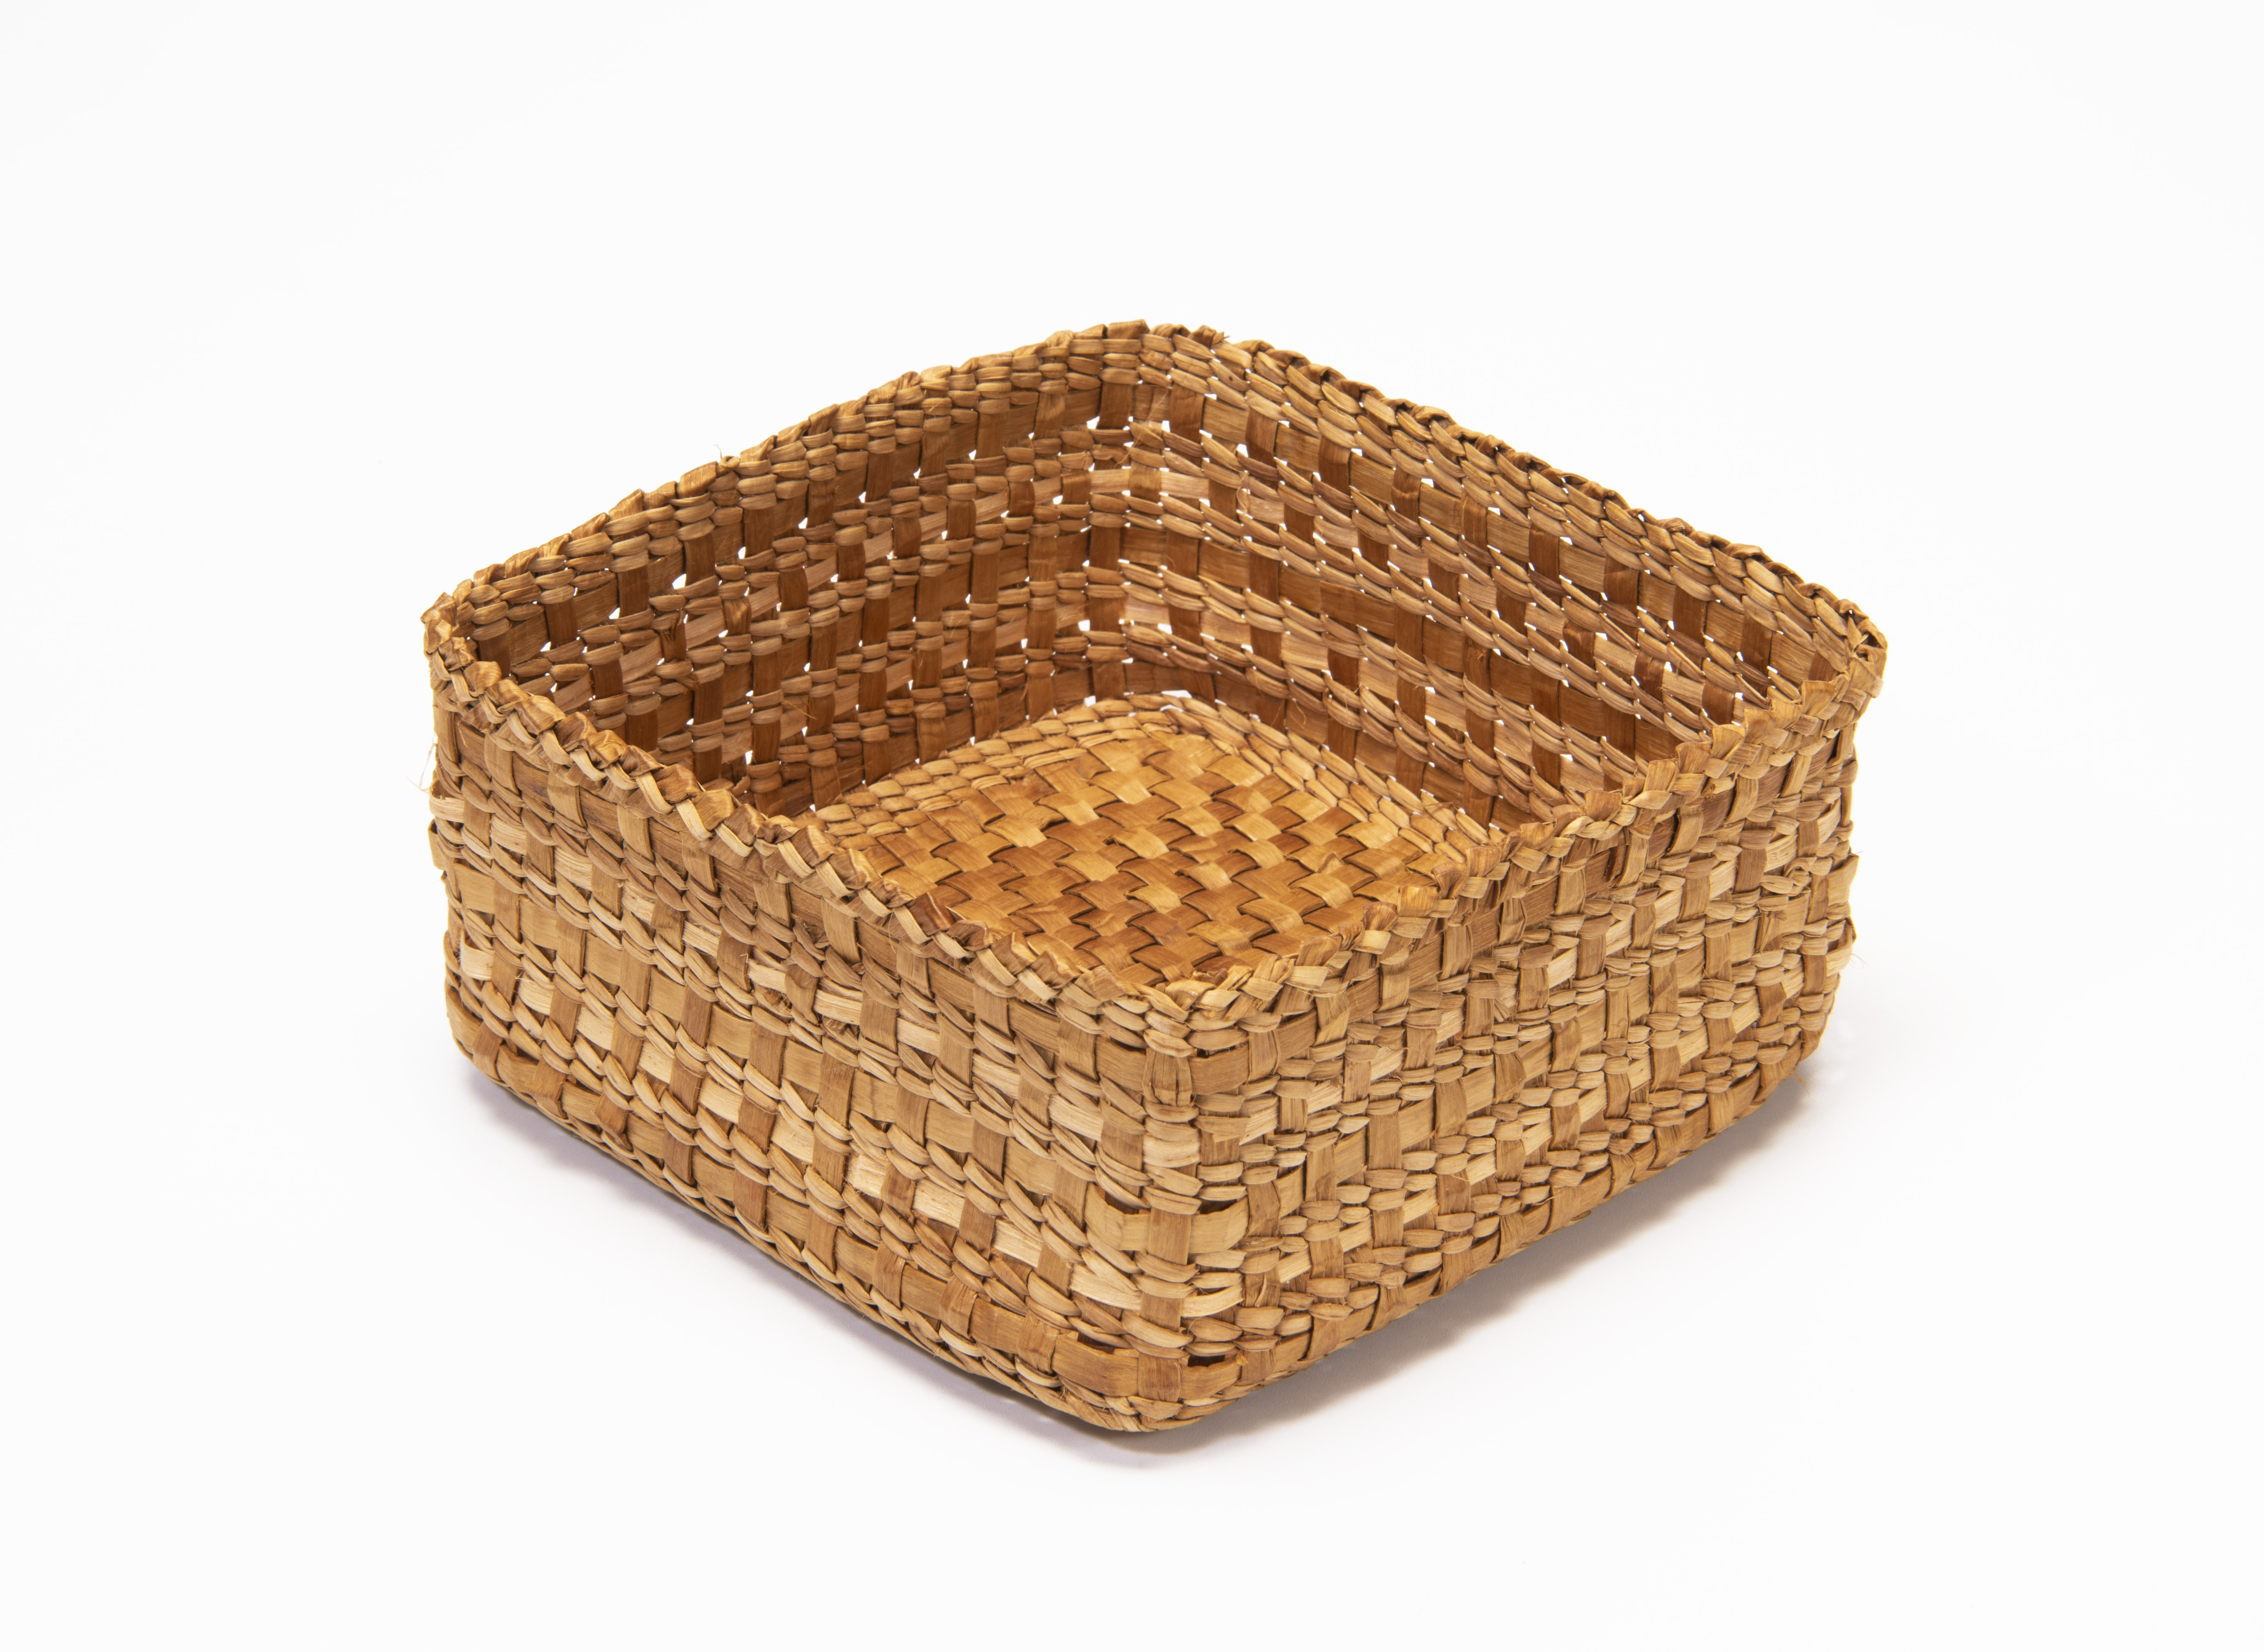 Small cedar basket in the process of being woven